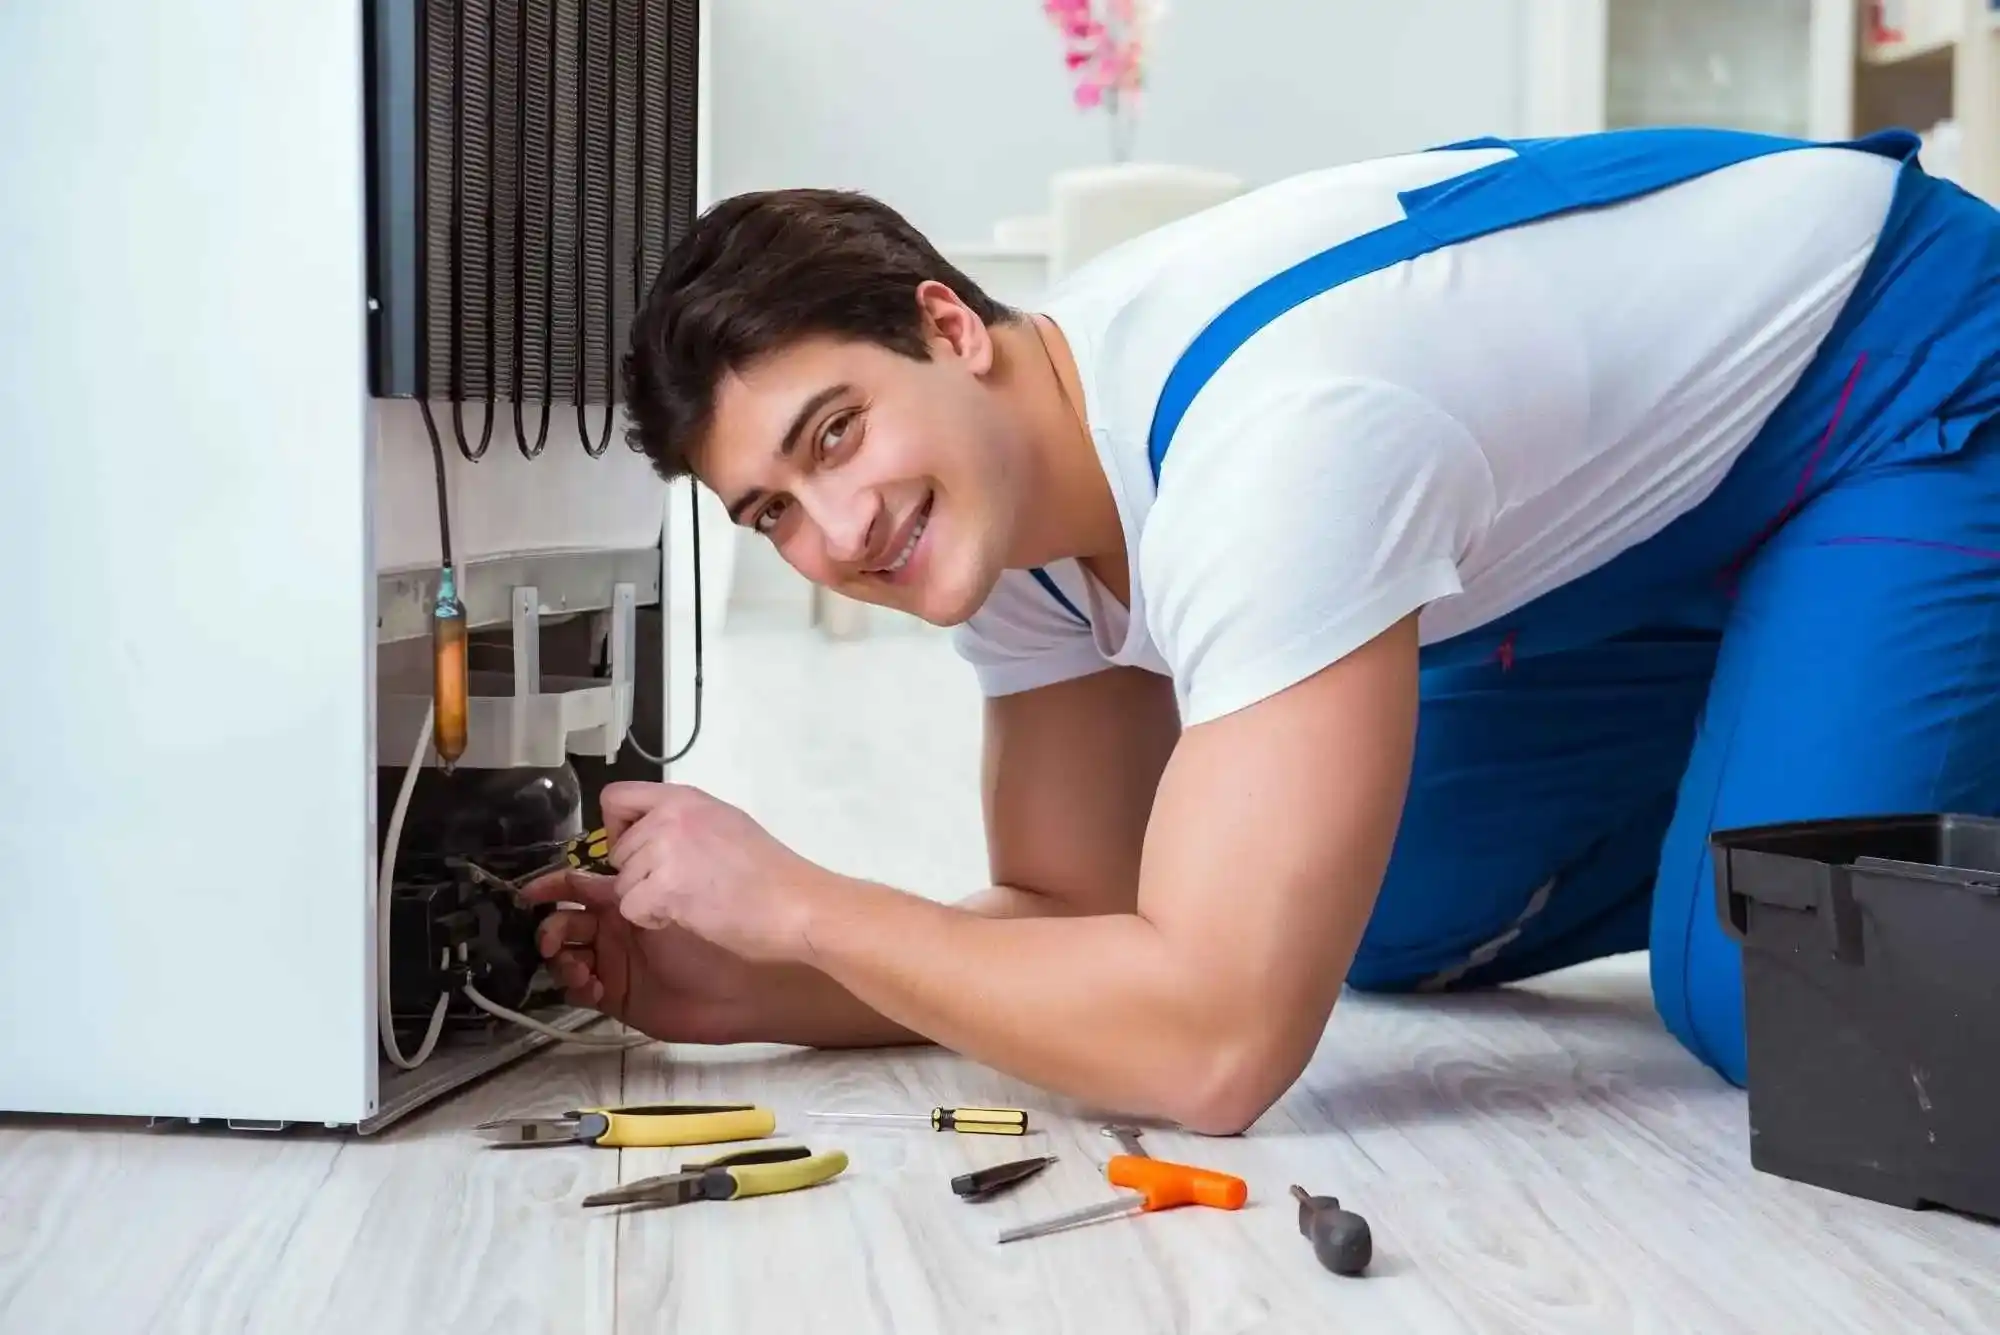 Repair Services in Sheikh Zayed